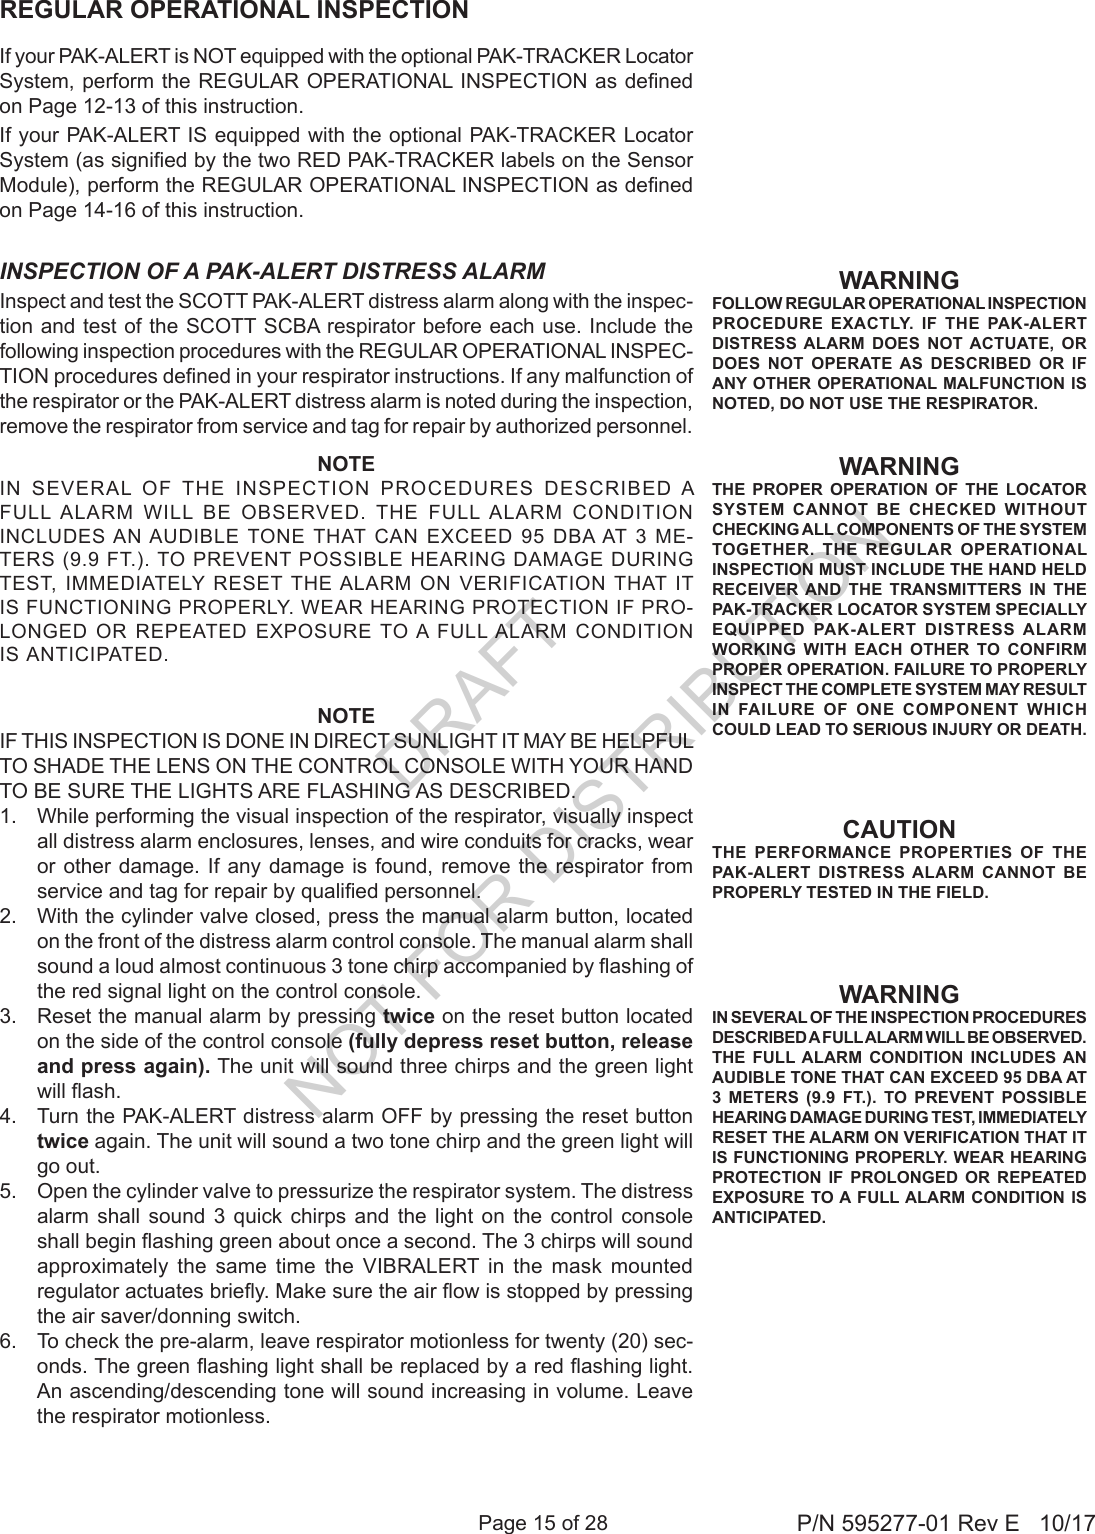 Page 15 of 28 P/N 595277-01 Rev E   10/17WARNINGFOLLOW REGULAR OPERATIONAL INSPECTION PROCEDURE EXACTLY. IF THE PAK-ALERT DISTRESS ALARM DOES NOT ACTUATE, OR DOES NOT OPERATE AS DESCRIBED OR IF ANY OTHER OPERATIONAL MALFUNCTION IS NOTED, DO NOT USE THE RESPIRATOR.WARNINGIN SEVERAL OF THE INSPECTION PROCEDURES DESCRIBED A FULL ALARM WILL BE OBSERVED. THE FULL ALARM CONDITION INCLUDES AN AUDIBLE TONE THAT CAN EXCEED 95 DBA AT 3 METERS (9.9 FT.). TO PREVENT POSSIBLE HEARING DAMAGE DURING TEST, IMMEDIATELY RESET THE ALARM ON VERIFICATION THAT IT IS FUNCTIONING PROPERLY. WEAR HEARING PROTECTION IF PROLONGED OR REPEATED EXPOSURE TO A FULL ALARM CONDITION IS ANTICIPATED.CAUTIONTHE PERFORMANCE PROPERTIES OF THE PAK-ALERT DISTRESS ALARM CANNOT BE PROPERLY TESTED IN THE FIELD.Inspect and test the SCOTT PAK-ALERT distress alarm along with the inspec-tion and test of the SCOTT SCBA respirator before each use. Include the following inspection procedures with the REGULAR OPERATIONAL INSPEC-TION procedures dened in your respirator instructions. If any malfunction of the respirator or the PAK-ALERT distress alarm is noted during the inspection, remove the respirator from service and tag for repair by authorized personnel.WARNINGTHE PROPER OPERATION OF THE LOCATOR SYSTEM CANNOT BE CHECKED WITHOUT CHECKING ALL COMPONENTS OF THE SYSTEM TOGETHER. THE REGULAR OPERATIONAL INSPECTION MUST INCLUDE THE HAND HELD RECEIVER AND THE TRANSMITTERS IN THE PAK-TRACKER LOCATOR SYSTEM SPECIALLY EQUIPPED PAK-ALERT DISTRESS ALARM WORKING WITH EACH OTHER TO CONFIRM PROPER OPERATION. FAILURE TO PROPERLY INSPECT THE COMPLETE SYSTEM MAY RESULT IN FAILURE OF ONE COMPONENT WHICH COULD LEAD TO SERIOUS INJURY OR DEATH.REGULAR OPERATIONAL INSPECTIONINSPECTION OF A PAK-ALERT DISTRESS ALARMNOTEIN  SEVERAL  OF  THE  INSPECTION  PROCEDURES  DESCRIBED  A FULL  ALARM  WILL  BE  OBSERVED.  THE  FULL  ALARM  CONDITION INCLUDES AN AUDIBLE  TONE THAT  CAN  EXCEED  95  DBA AT 3  ME-TERS (9.9 FT.). TO PREVENT POSSIBLE HEARING DAMAGE DURING TEST,  IMMEDIATELY  RESET THE ALARM  ON  VERIFICATION THAT  IT IS FUNCTIONING PROPERLY. WEAR HEARING PROTECTION IF PRO-LONGED  OR REPEATED  EXPOSURE TO A  FULL ALARM  CONDITION IS ANTICIPATED.NOTEIF THIS INSPECTION IS DONE IN DIRECT SUNLIGHT IT MAY BE HELPFUL TO SHADE THE LENS ON THE CONTROL CONSOLE WITH YOUR HAND TO BE SURE THE LIGHTS ARE FLASHING AS DESCRIBED.1.  While performing the visual inspection of the respirator, visually inspect all distress alarm enclosures, lenses, and wire conduits for cracks, wear or other damage. If any damage is found, remove the respirator from service and tag for repair by qualied personnel. 2.  With the cylinder valve closed, press the manual alarm button, located on the front of the distress alarm control console. The manual alarm shall sound a loud almost continuous 3 tone chirp accompanied by ashing of the red signal light on the control console. 3.  Reset the manual alarm by pressing twice on the reset button located on the side of the control console (fully depress reset button, release and press again). The unit will sound three chirps and the green light will ash. 4.  Turn the PAK-ALERT distress alarm OFF by pressing the reset button twice again. The unit will sound a two tone chirp and the green light will go out.5.  Open the cylinder valve to pressurize the respirator system. The distress alarm shall sound 3 quick chirps and the light on the control console shall begin ashing green about once a second. The 3 chirps will sound approximately the same time the VIBRALERT in the mask mounted regulator actuates briey. Make sure the air ow is stopped by pressing the air saver/donning switch. 6.  To check the pre-alarm, leave respirator motionless for twenty (20) sec-onds. The green ashing light shall be replaced by a red ashing light. An ascending/descending tone will sound increasing in volume. Leave the respirator motionless.If your PAK-ALERT is NOT equipped with the optional PAK-TRACKER Locator System, perform the REGULAR OPERATIONAL INSPECTION as dened on Page 12-13 of this instruction.If your PAK-ALERT IS equipped with the optional PAK-TRACKER Locator System (as signied by the two RED PAK-TRACKER labels on the Sensor Module), perform the REGULAR OPERATIONAL INSPECTION as dened on Page 14-16 of this instruction.DRAFT  NOT FOR DISTRIBUTION